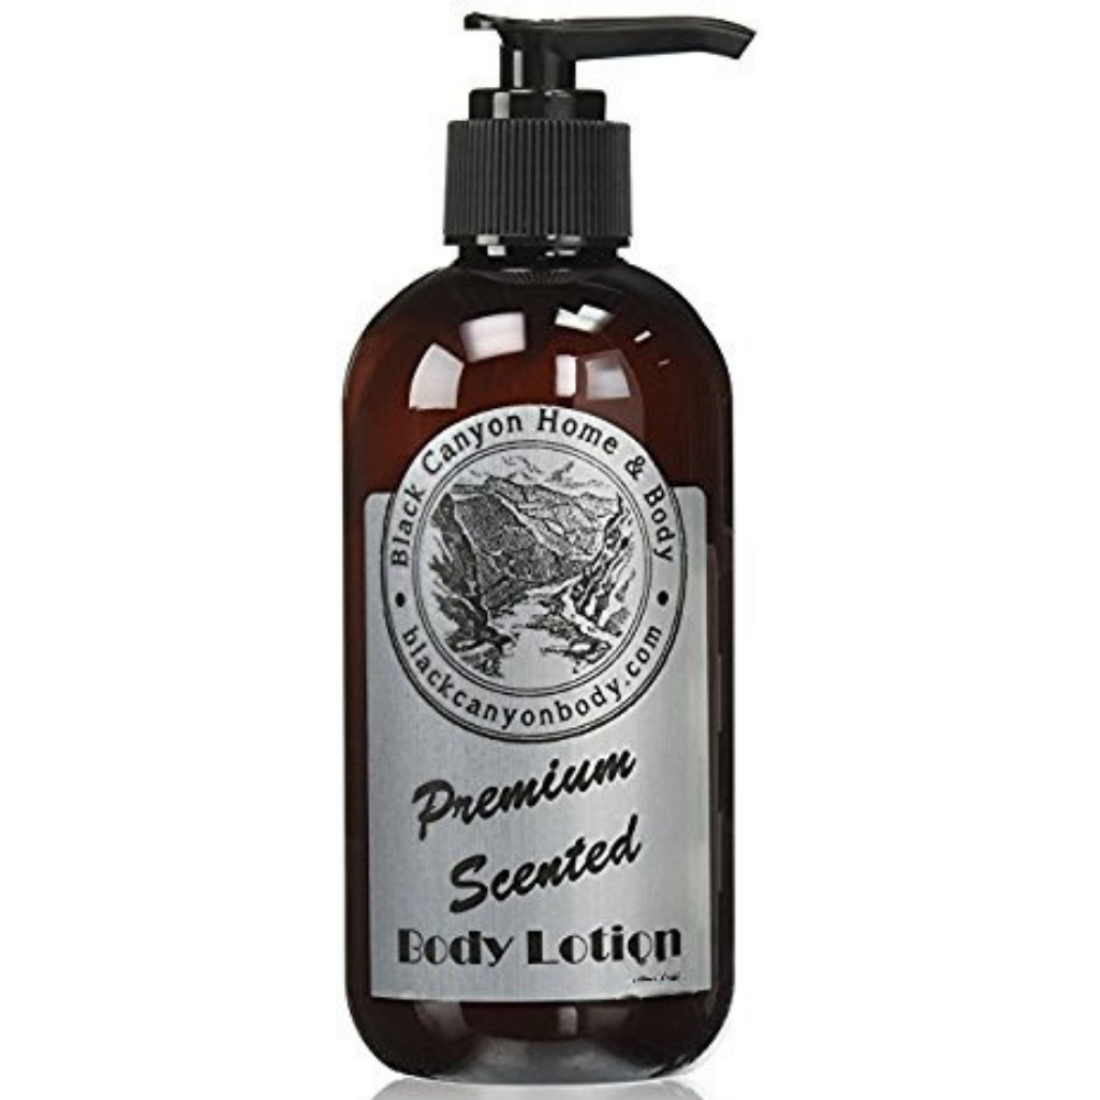 Black Canyon Berries & Cream Scented Luxury Body Lotion with Lanolin and Jojoba Oil